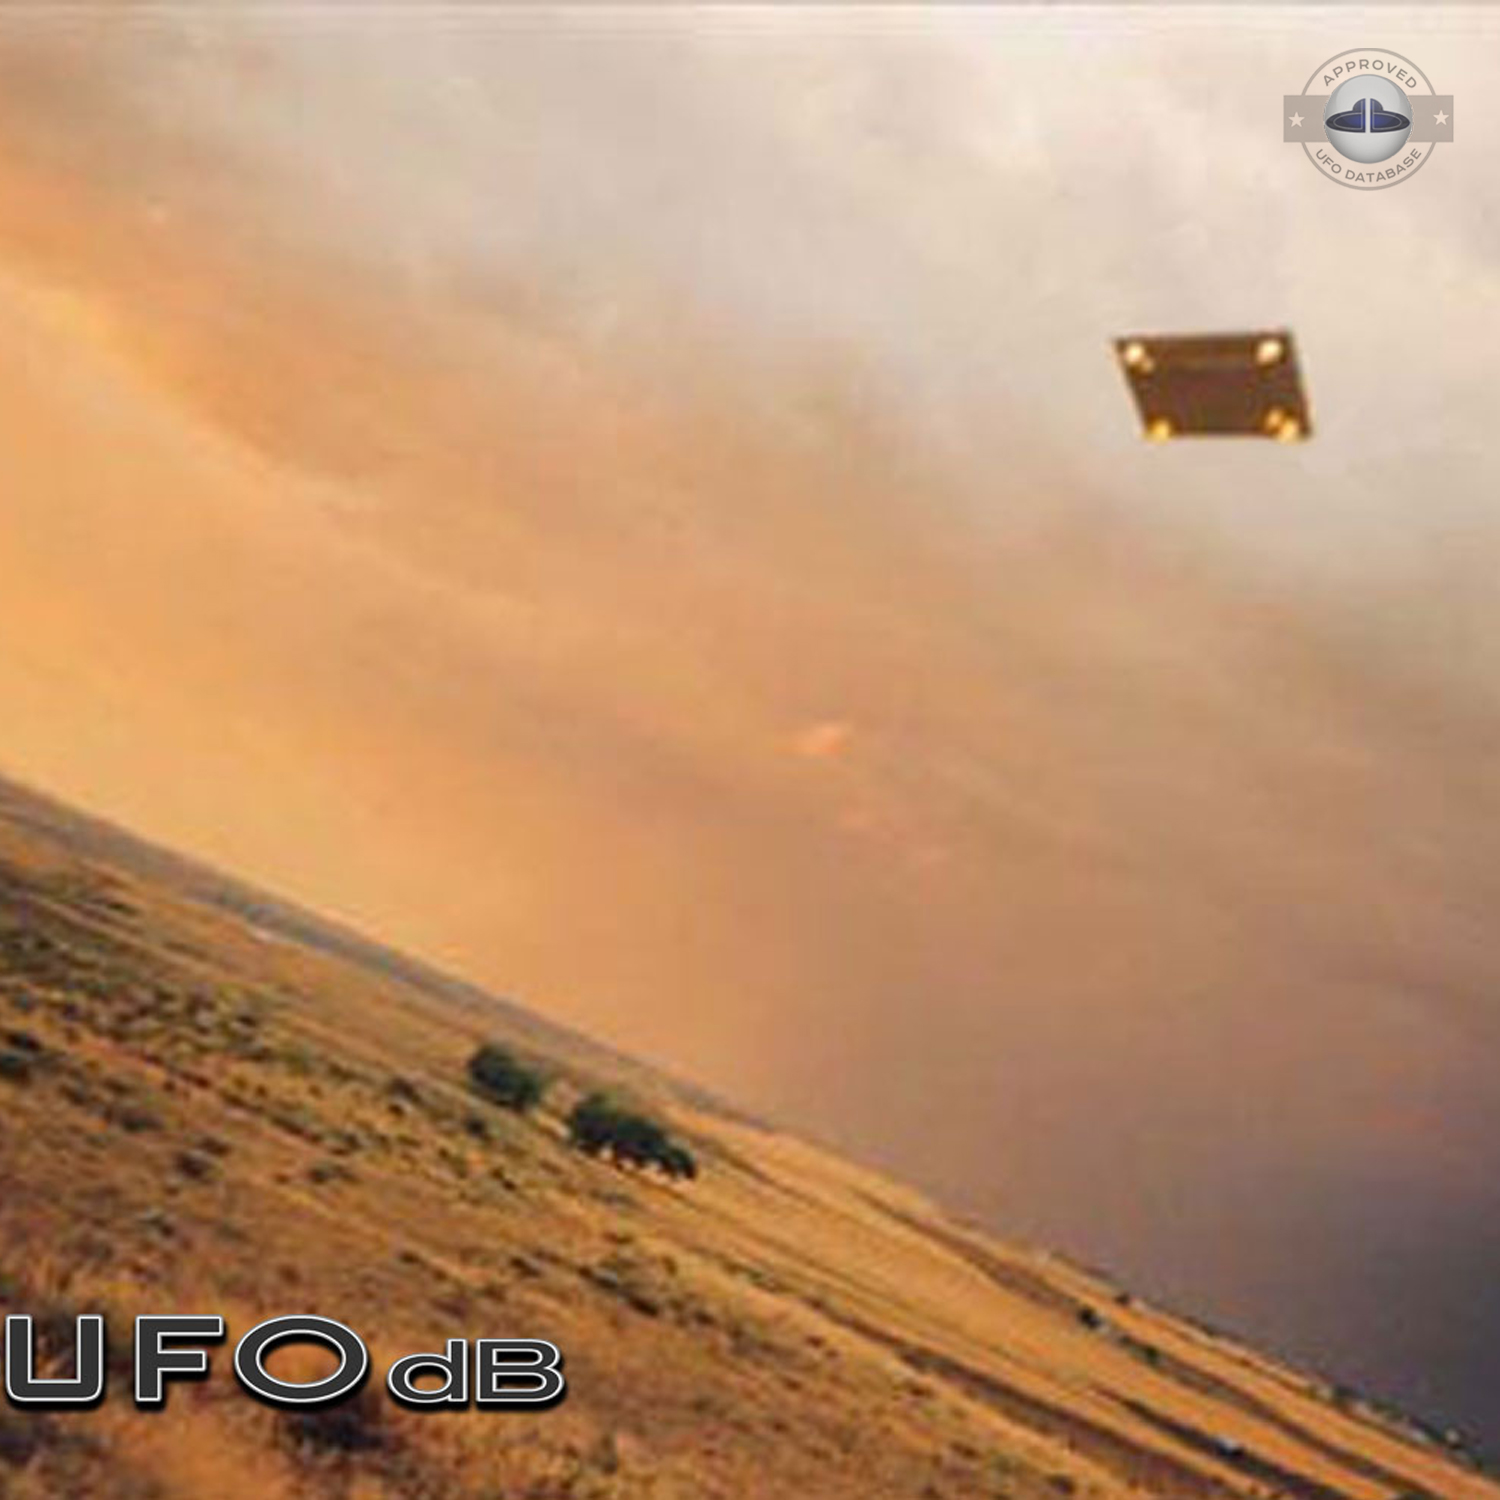 Incredible UFO picture showing a square shaped UFO Kanarraville USA UFO Picture #98-2